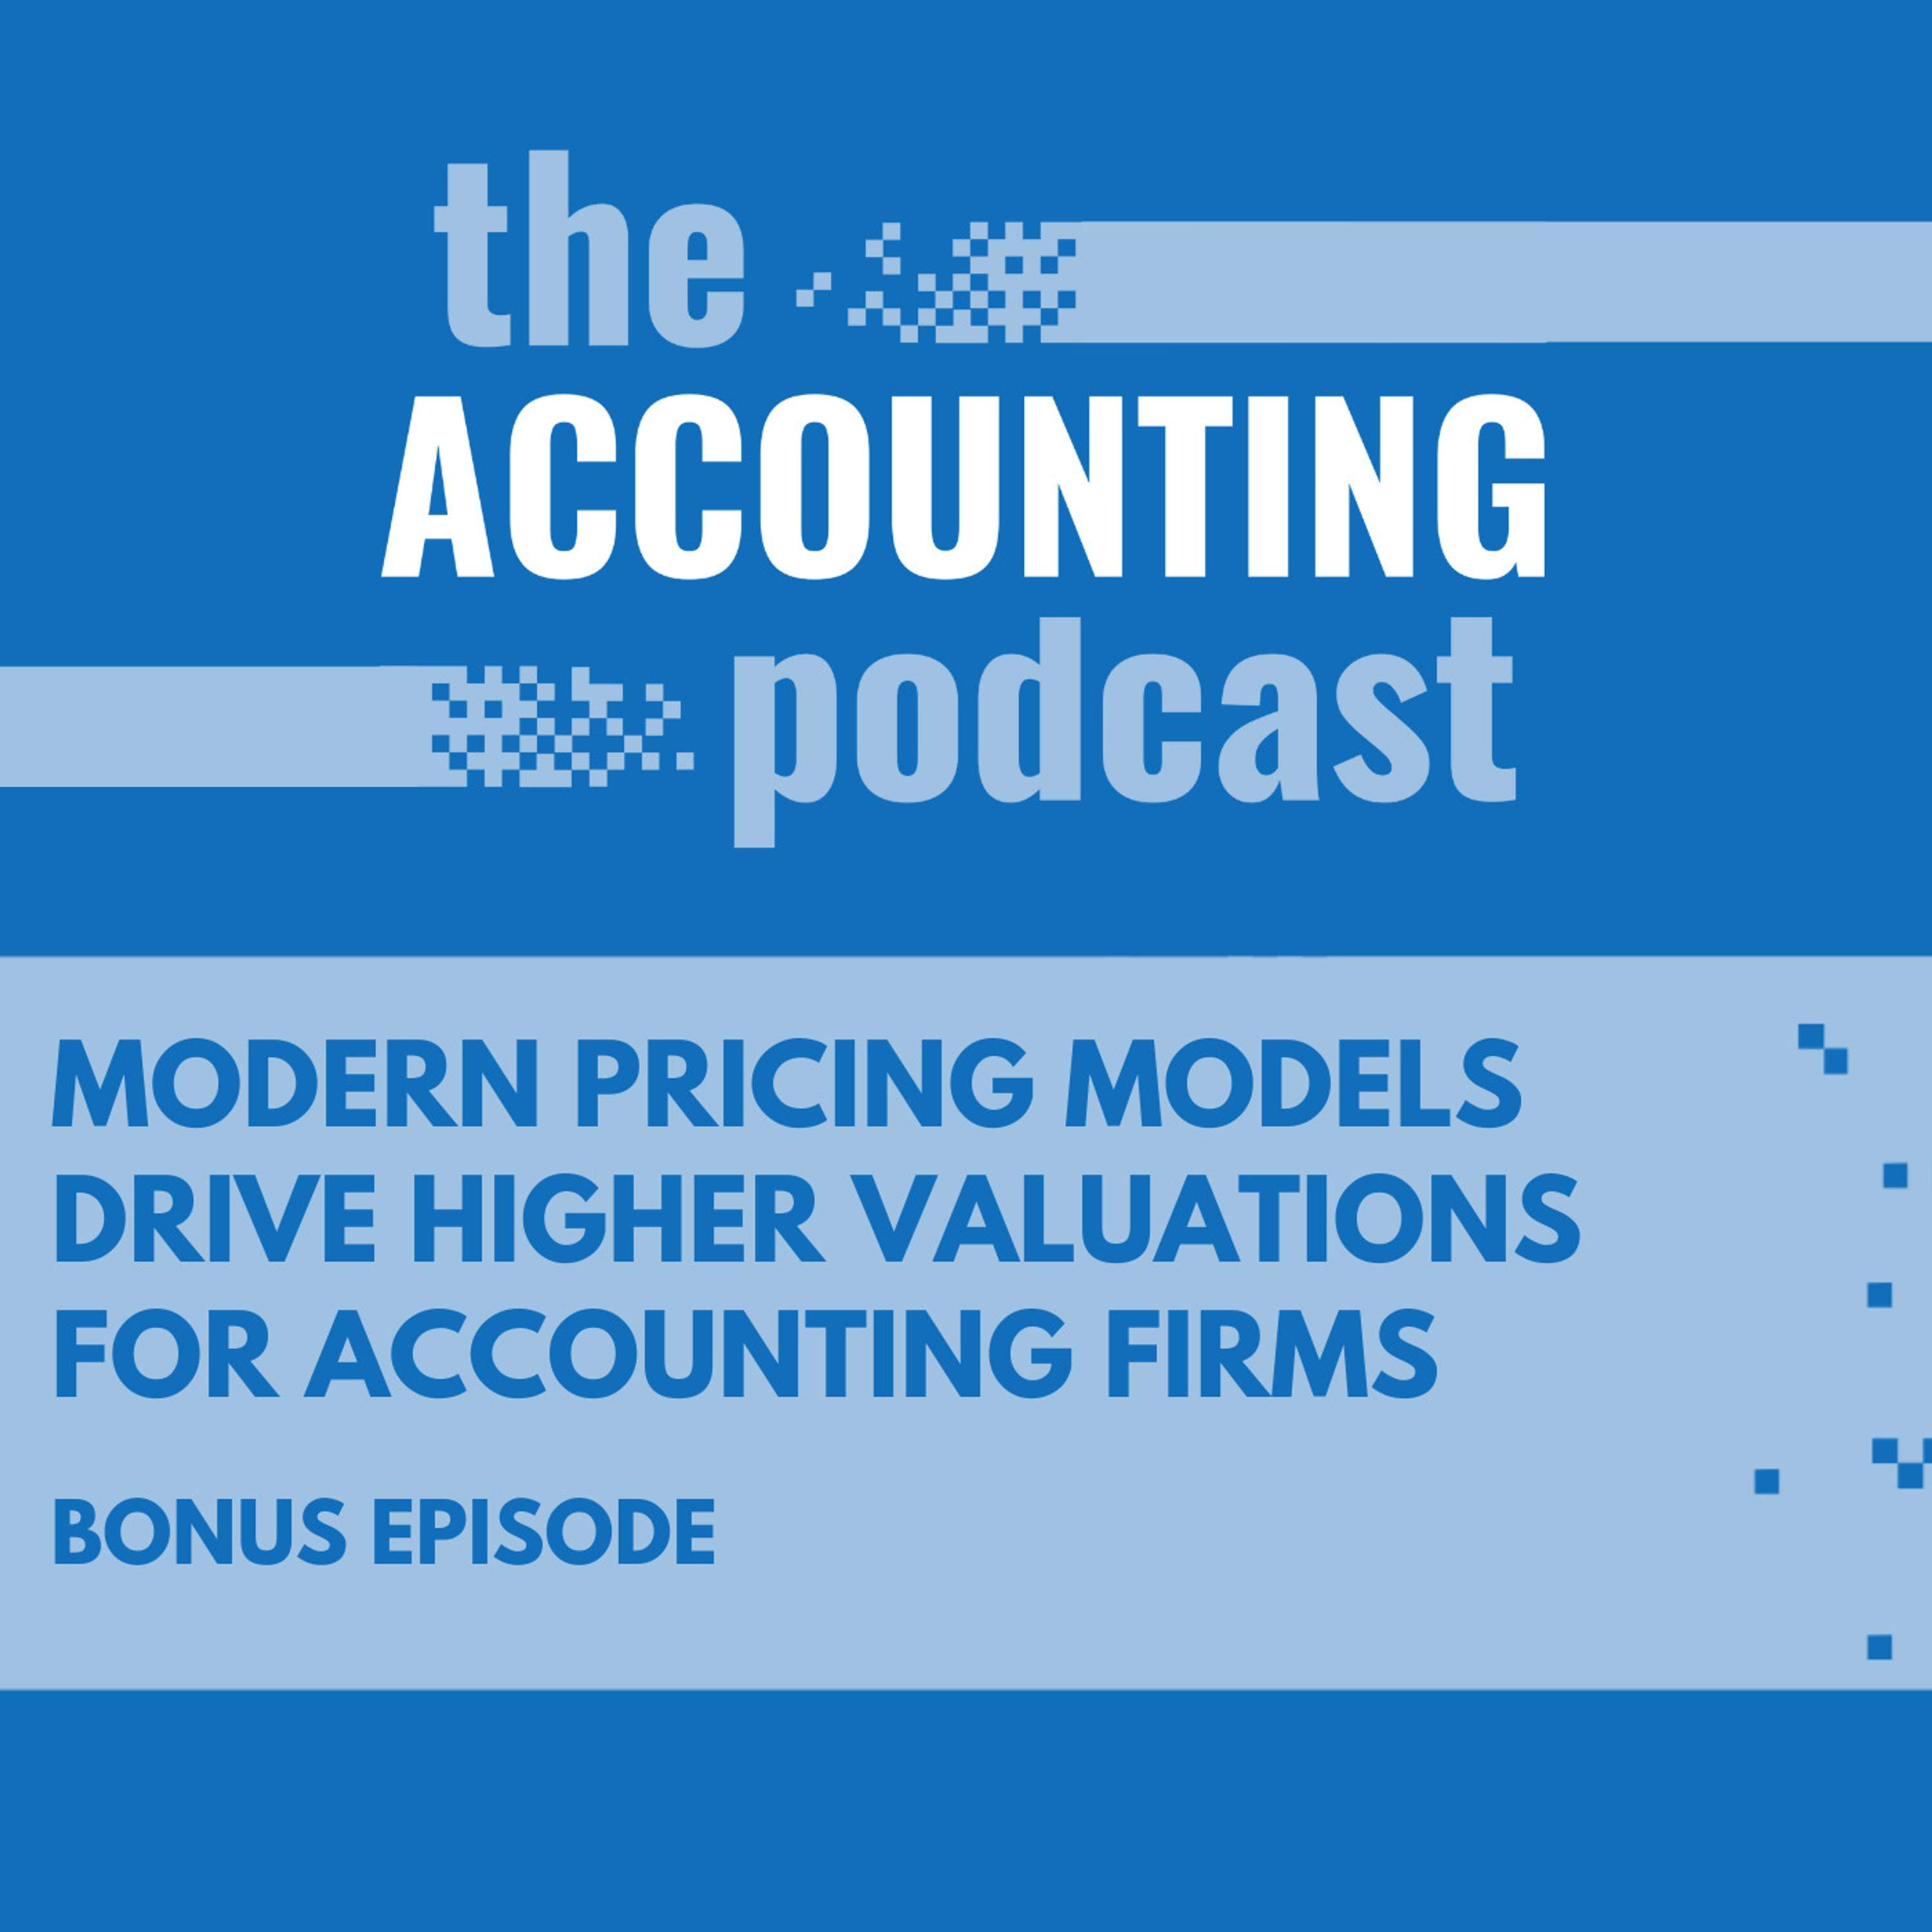 Modern Pricing Models Drive Higher Valuations for Accounting Firms